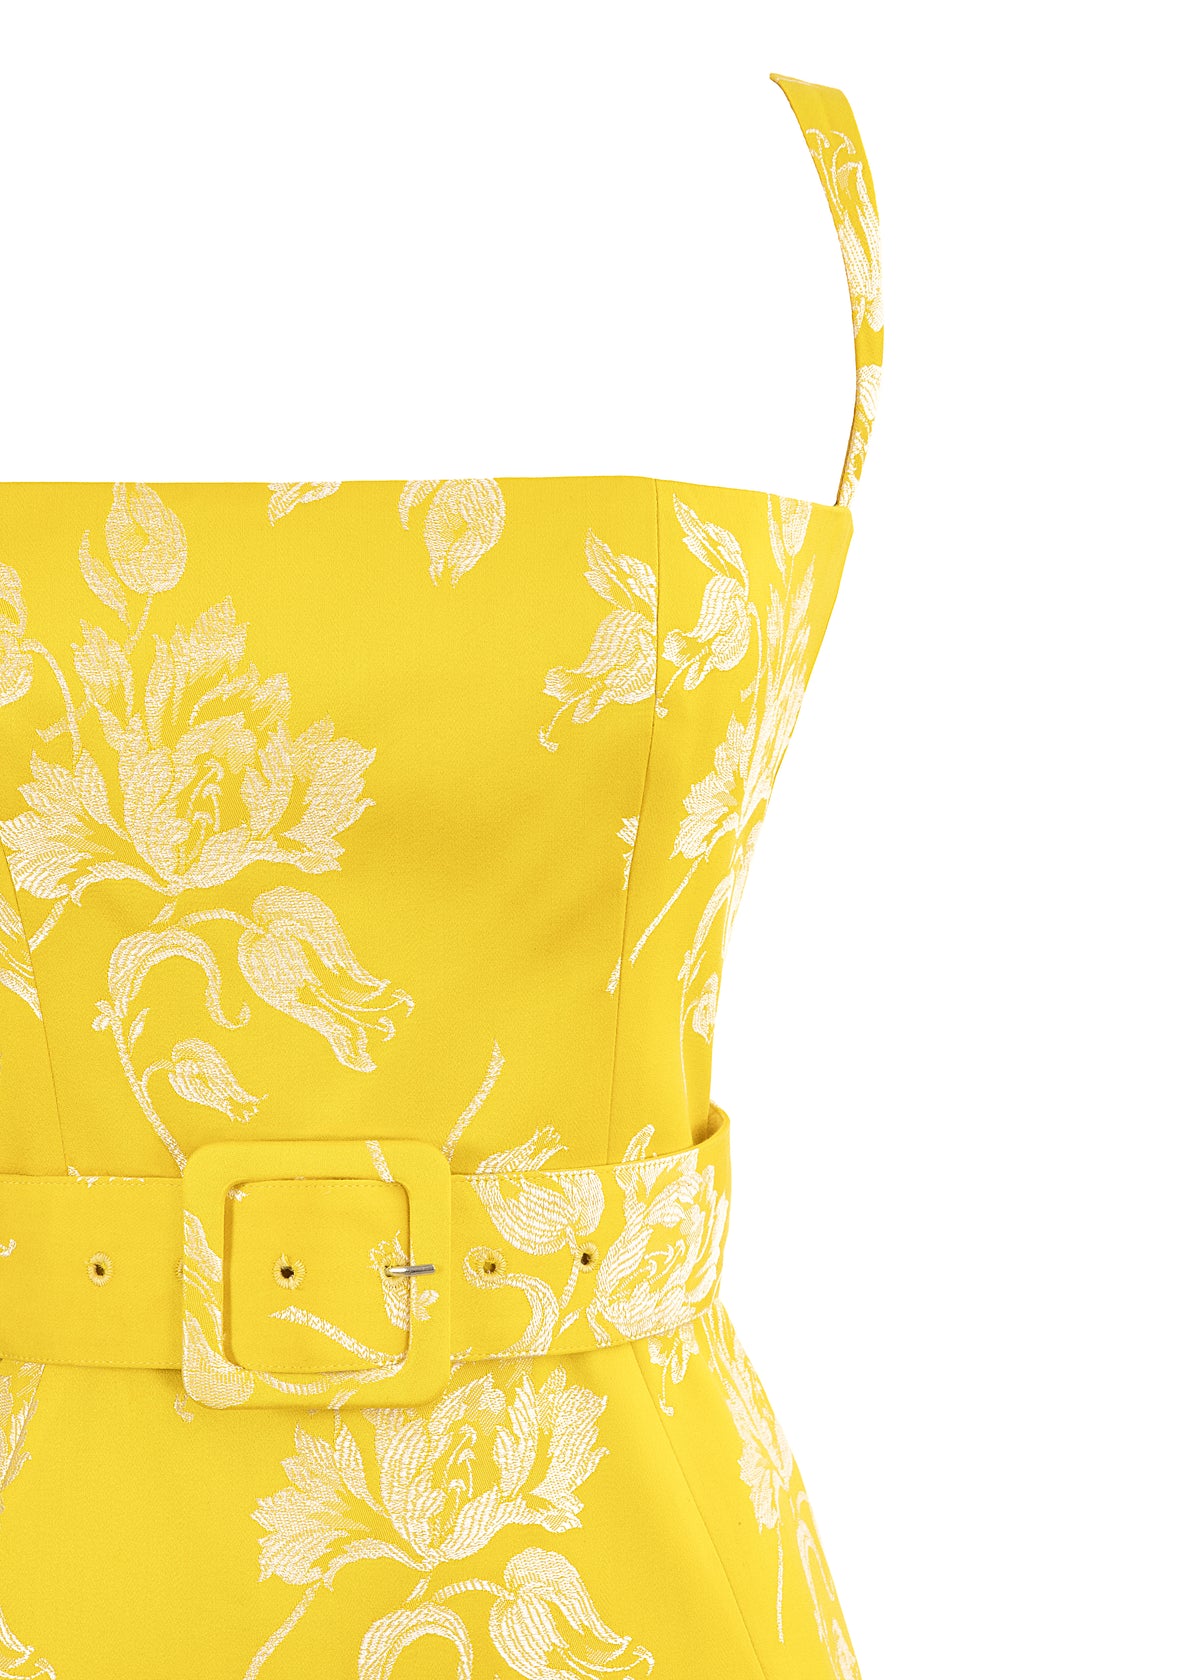 Alexandra Dress in Yellow Floral